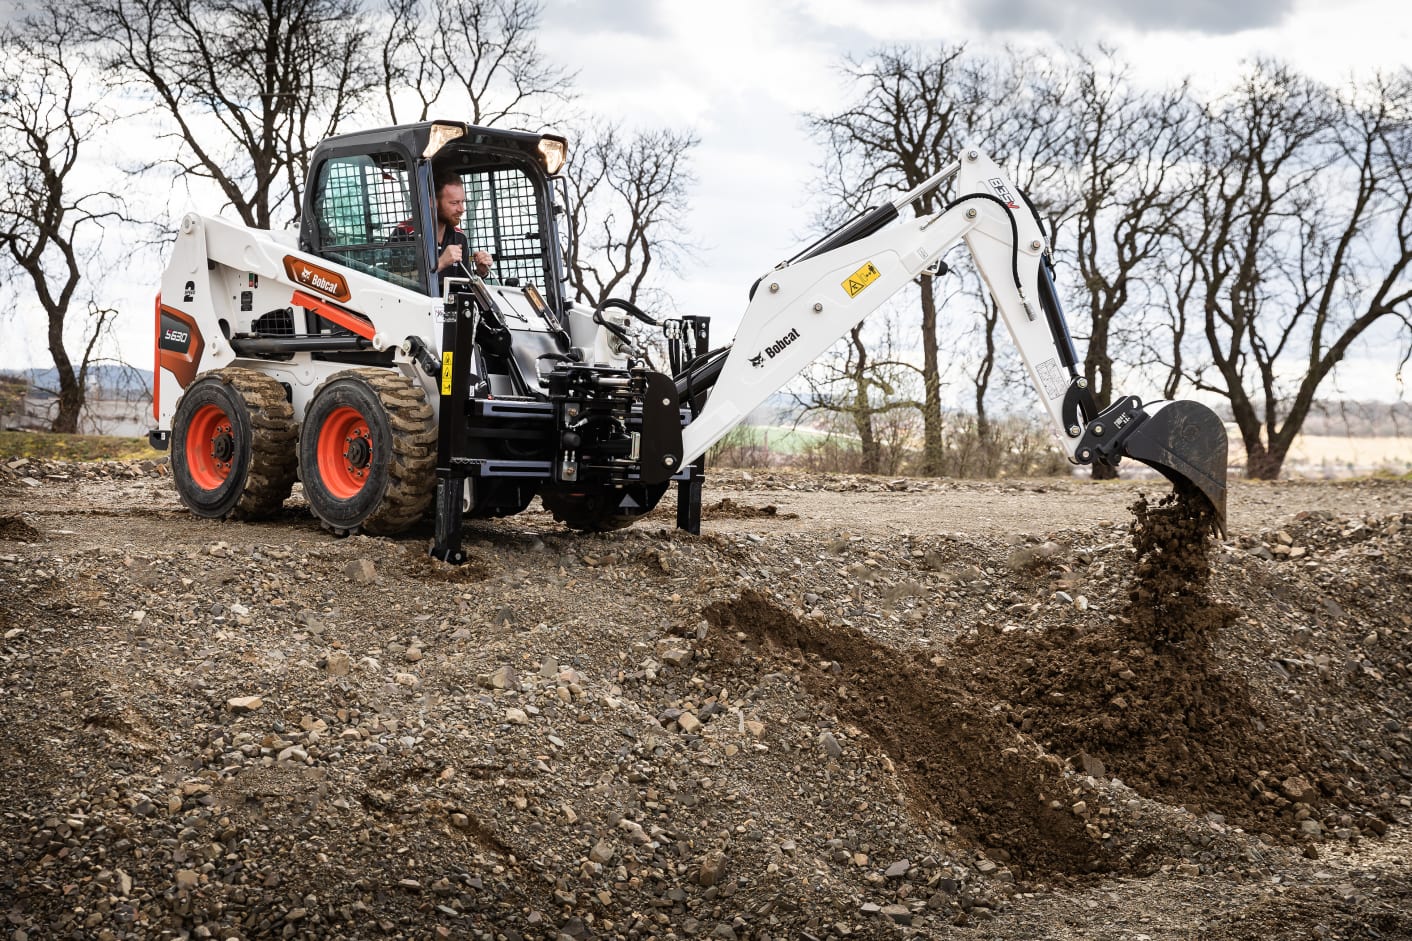 Browse Specs and more for the Bobcat S630 Skid-Steer Loader - White Star Machinery